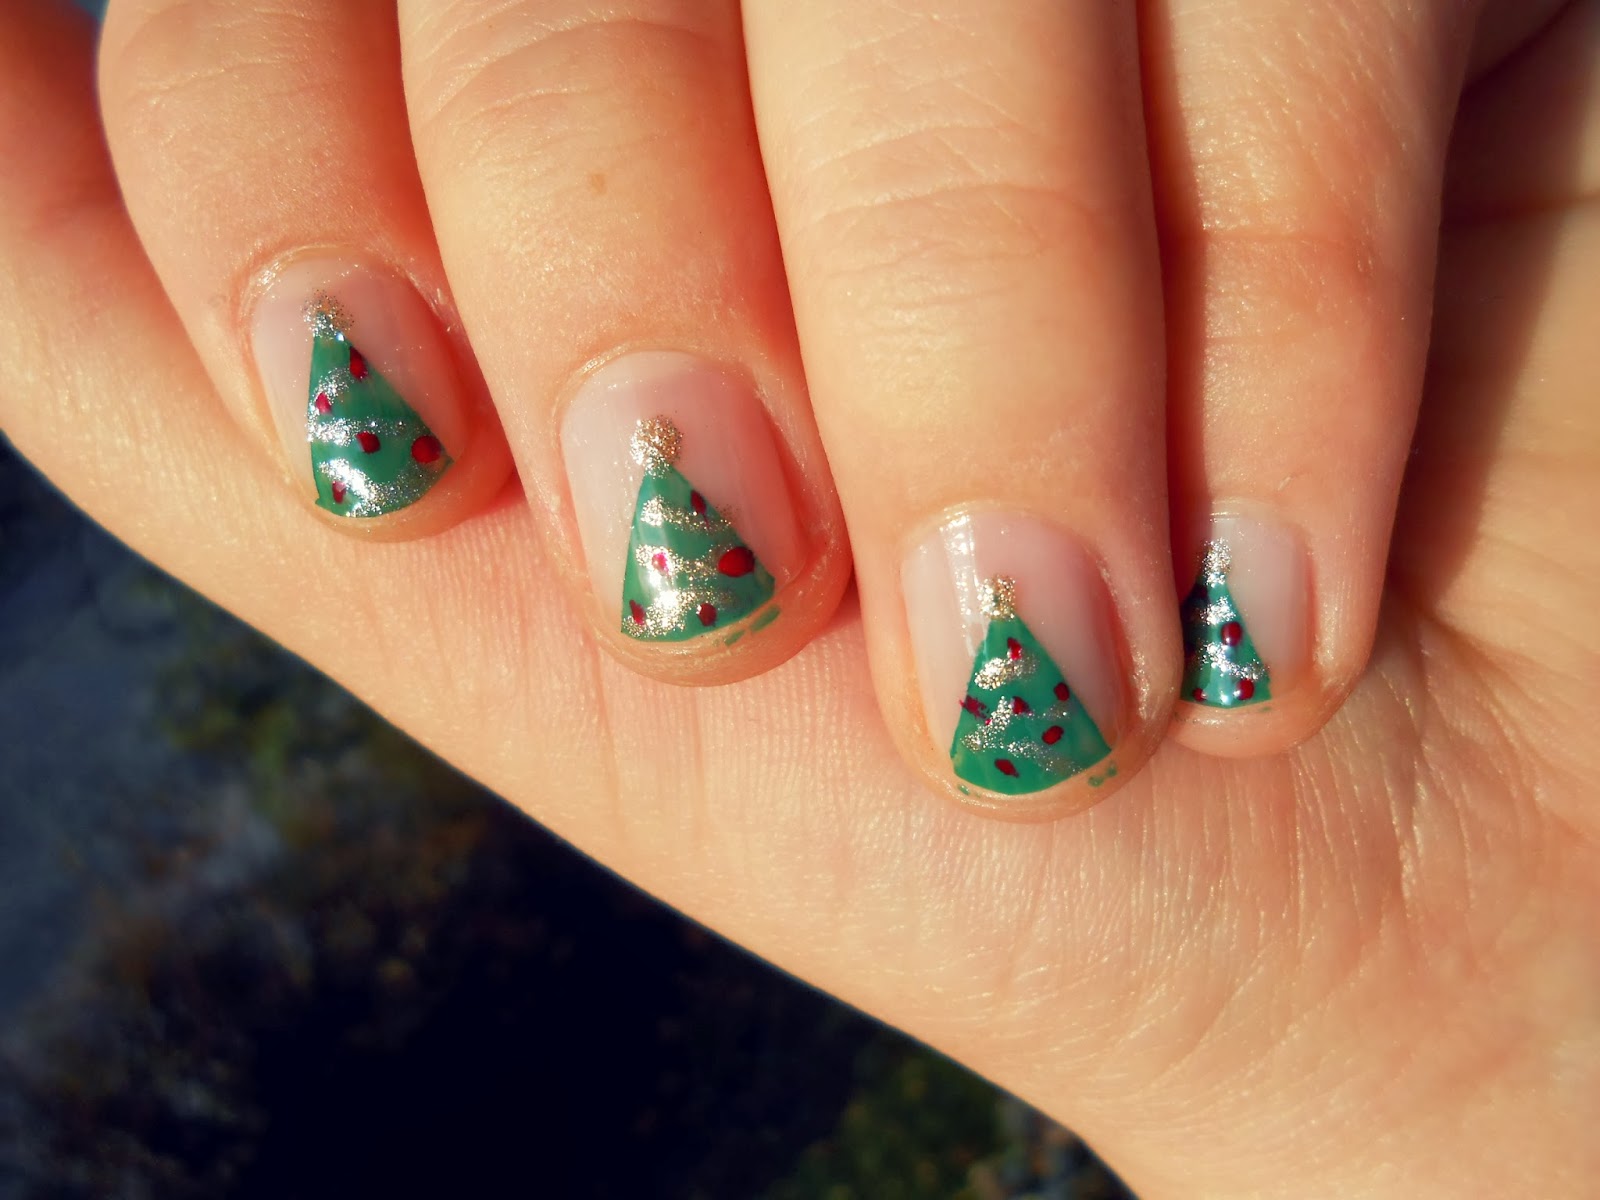 2. "Christmas Tree Nails" - wide 9